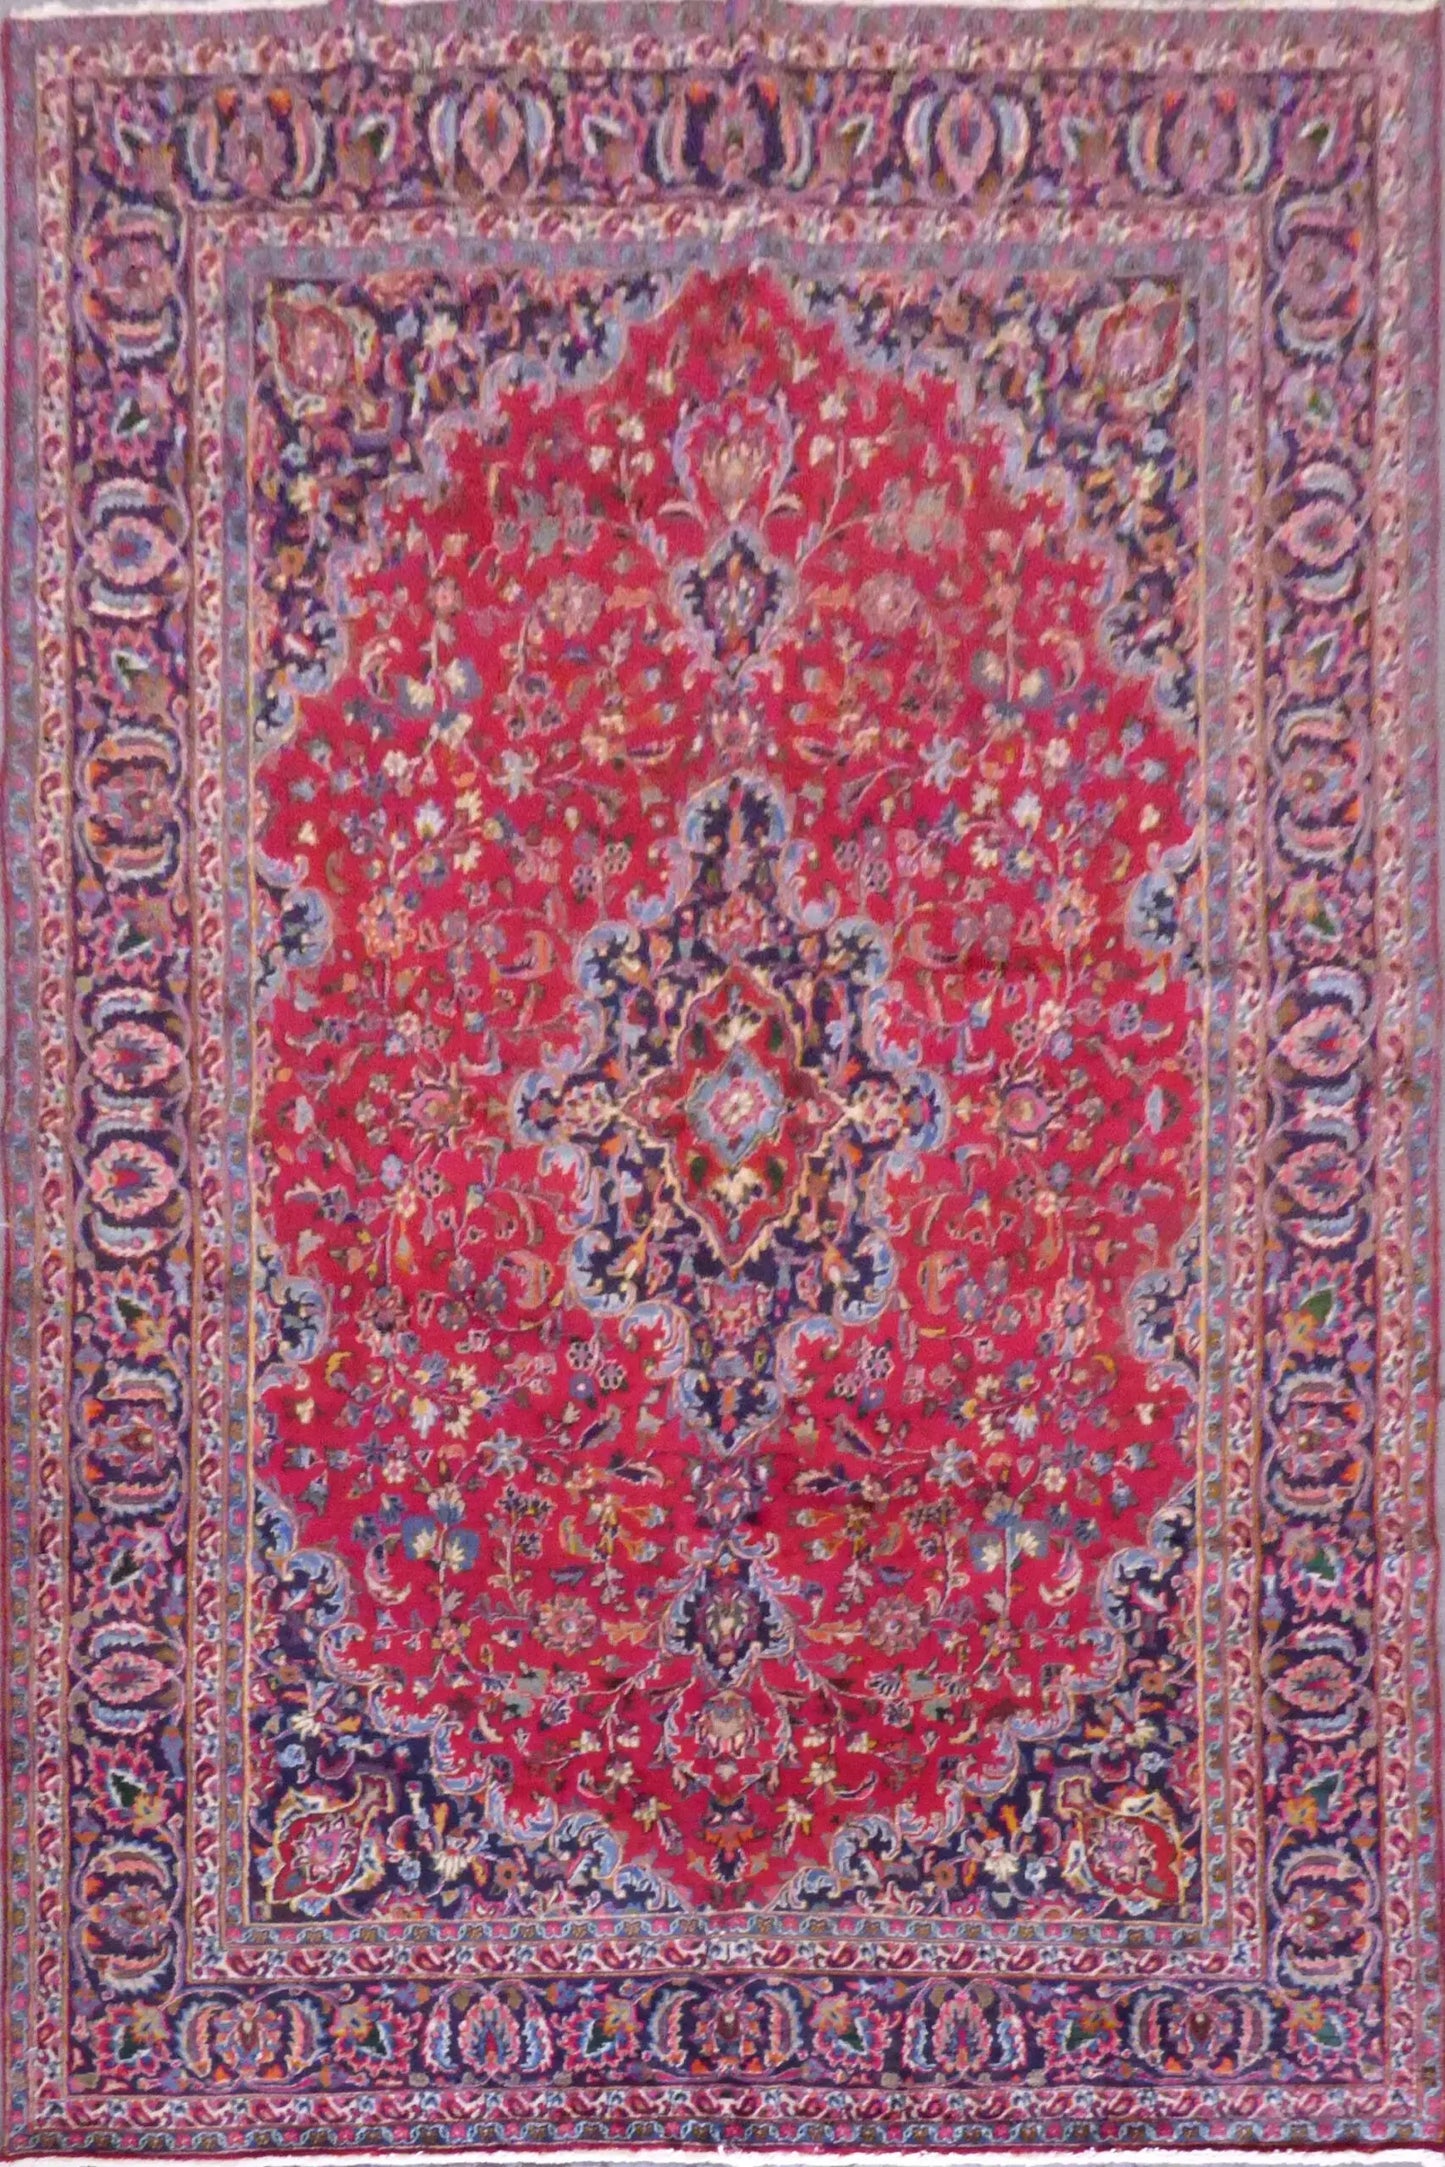 Kashan New Hand Knotted Persian Kashan Tabriz Rugs Multi Color, 8' X 11'6", Panr01254 (Red : 10686)